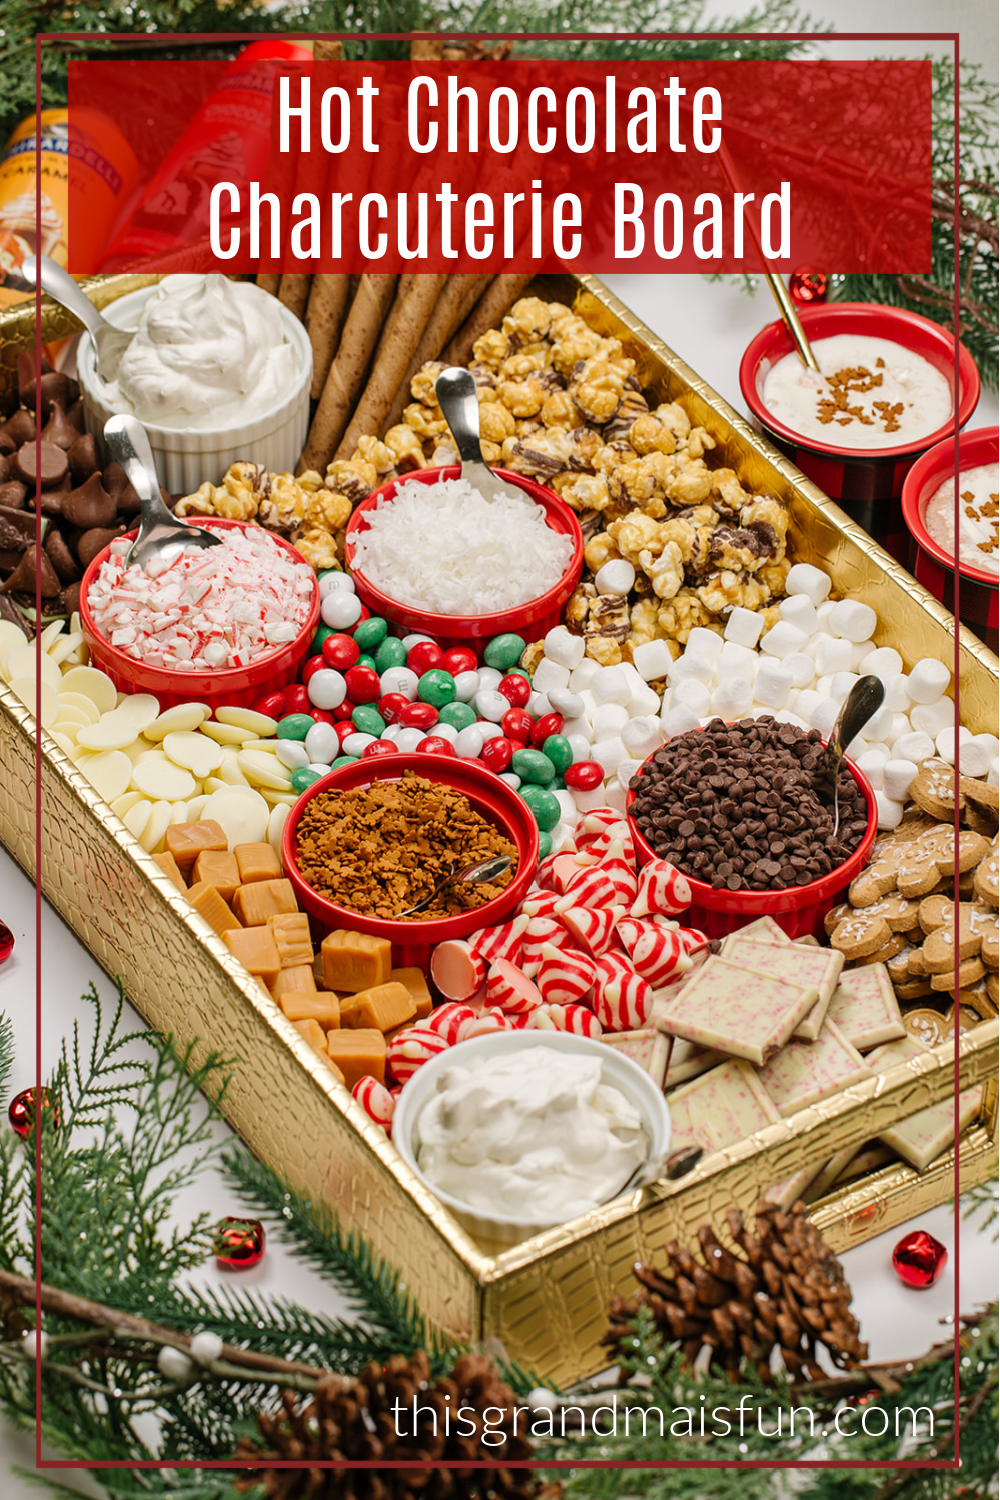 With a myriad of goodies, kids LOVE to make their own Hot Chocolate Charcuterie Board. And adults love them too!